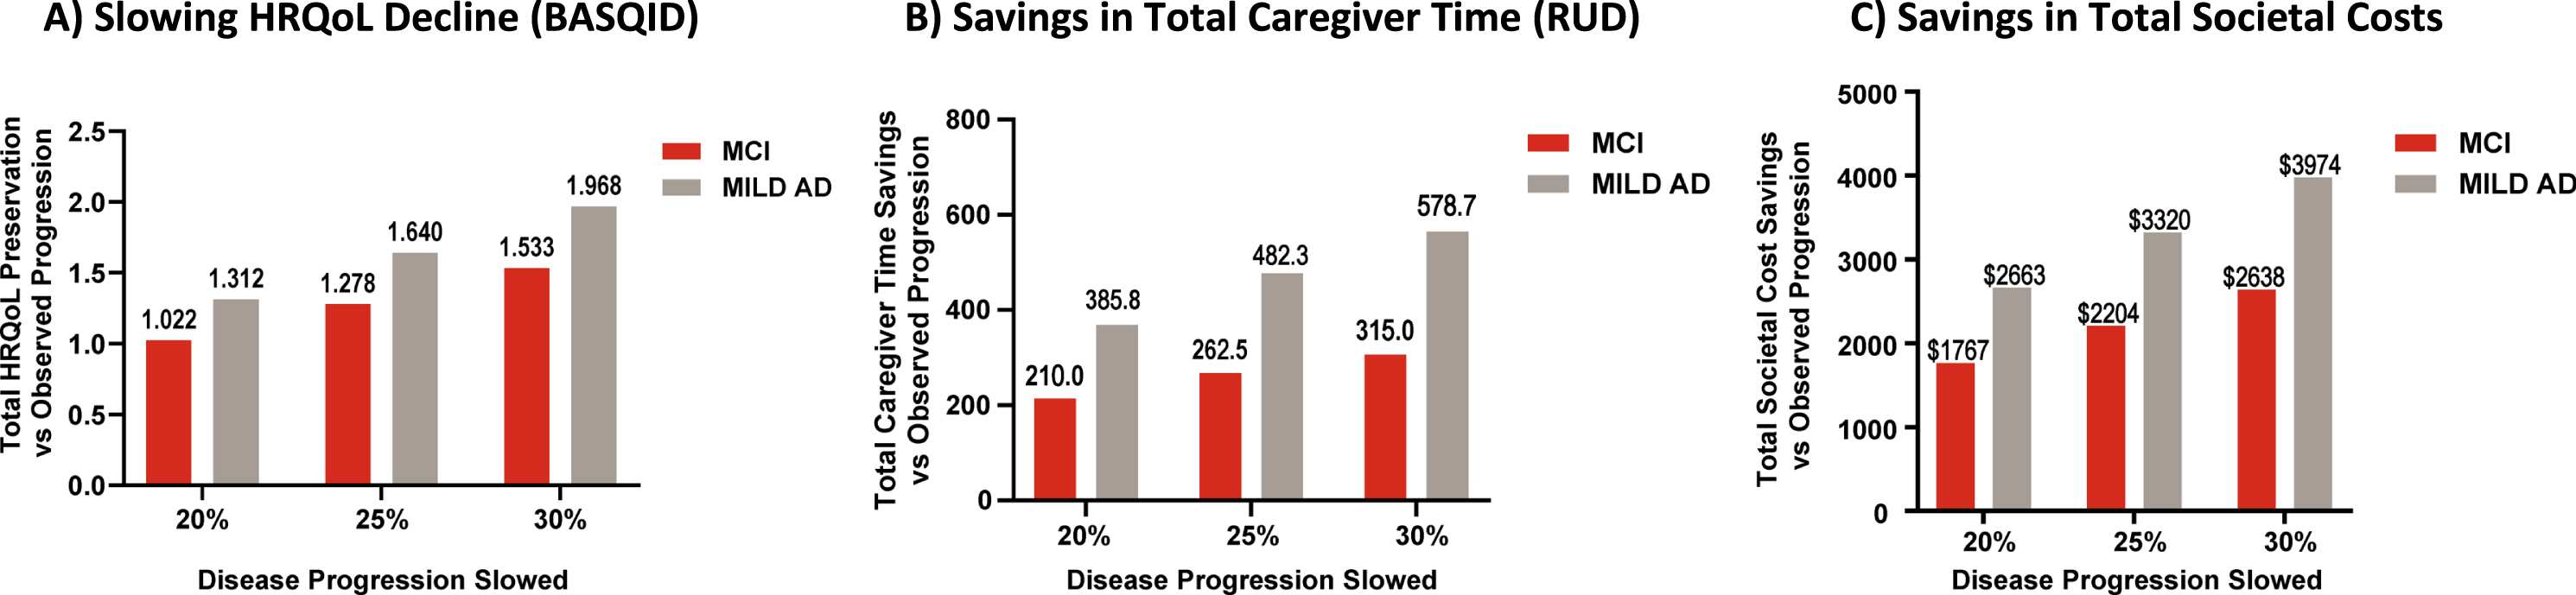 Potential slowing of HRQoL decline and savings in total caregiver time and total societal costs with slowing of disease progression over 36 months (by MMSE). AD, Alzheimer’s disease; BASQID, Bath Assessment of Subjective Quality of Life in Dementia; HRQoL, health-related quality of life; MCI, mild cognitive impairment; MILD AD, mild dementia due to AD; MMSE, Mini-Mental State Examination; RUD, Resource Utilization in Dementia questionnaire; vs, versus. All comparisons presented over 36 months are with natural progression. Caregiver time capped at 540 hours/month.